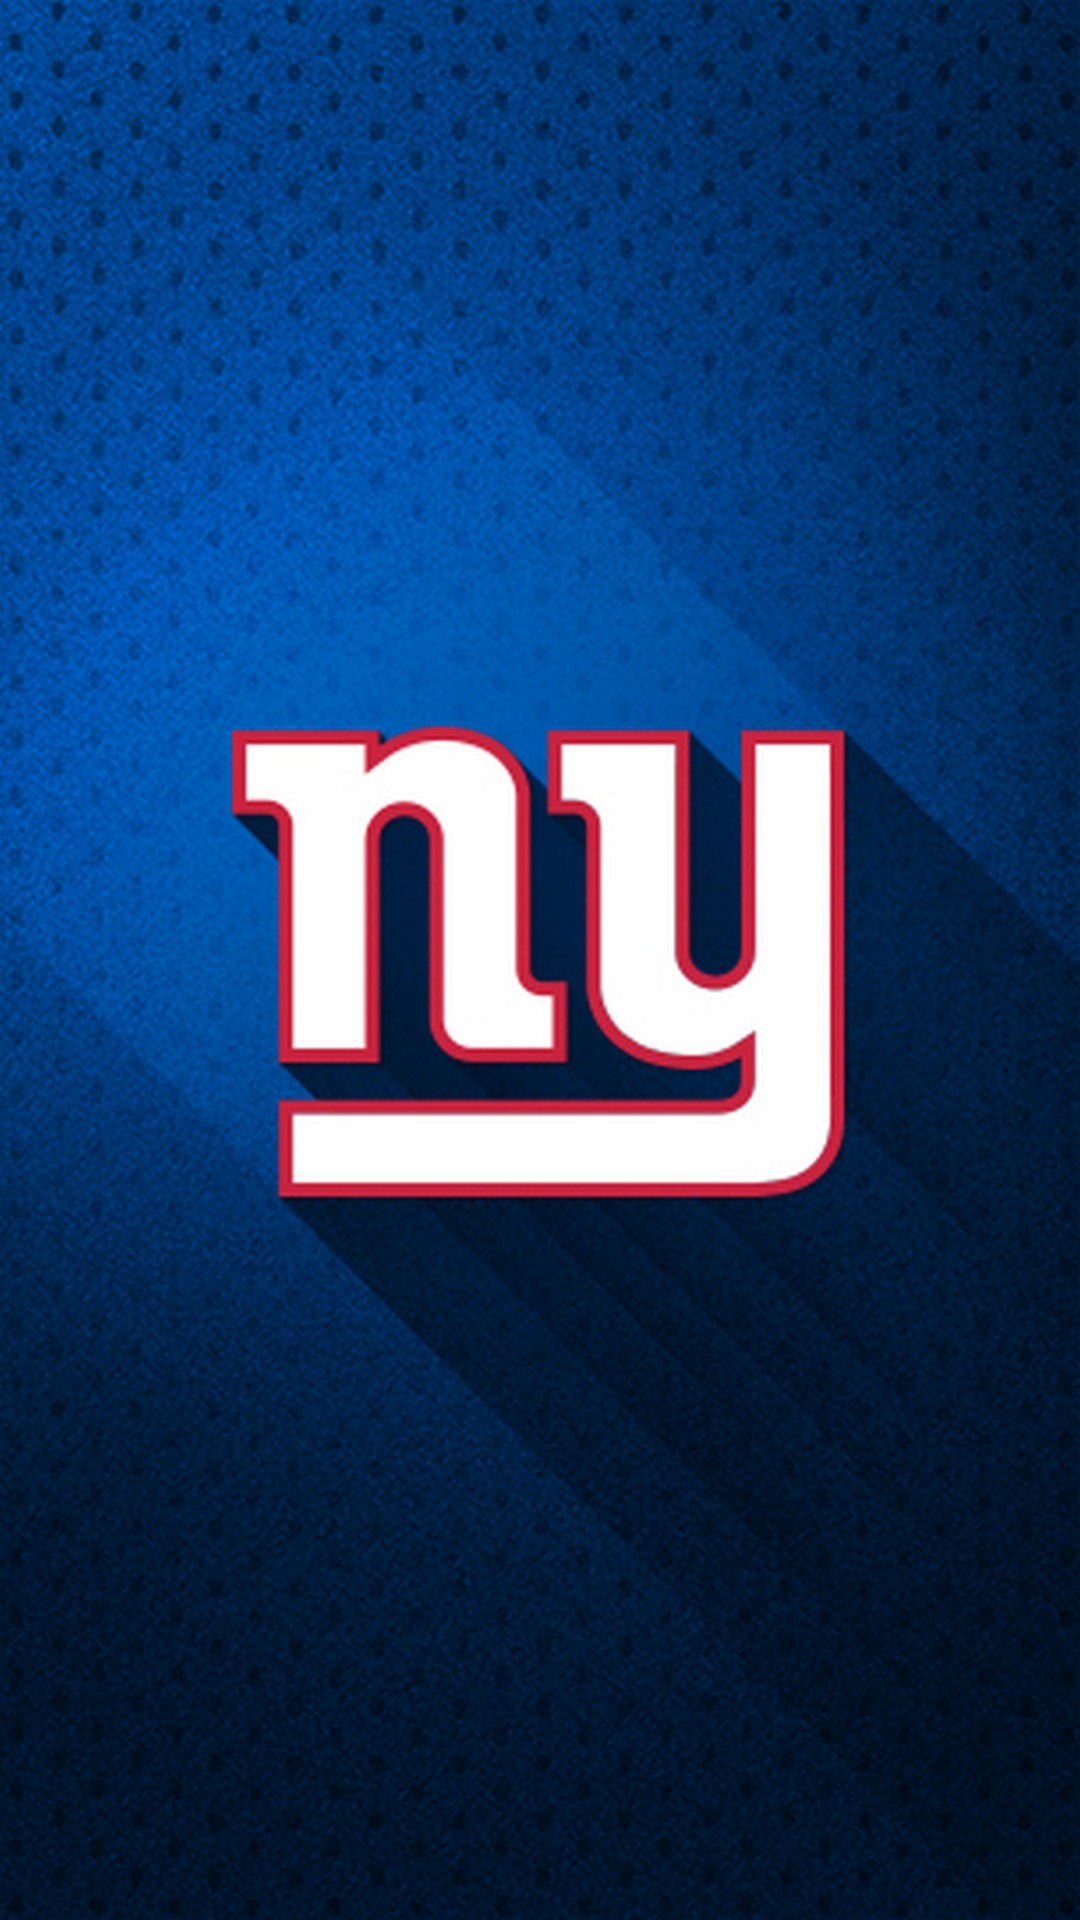 New York Giants iPhone 7 Plus Wallpaper with high-resolution 1080x1920 pixel. Download and set as wallpaper for Desktop Computer, Apple iPhone X, XS Max, XR, 8, 7, 6, SE, iPad, Android